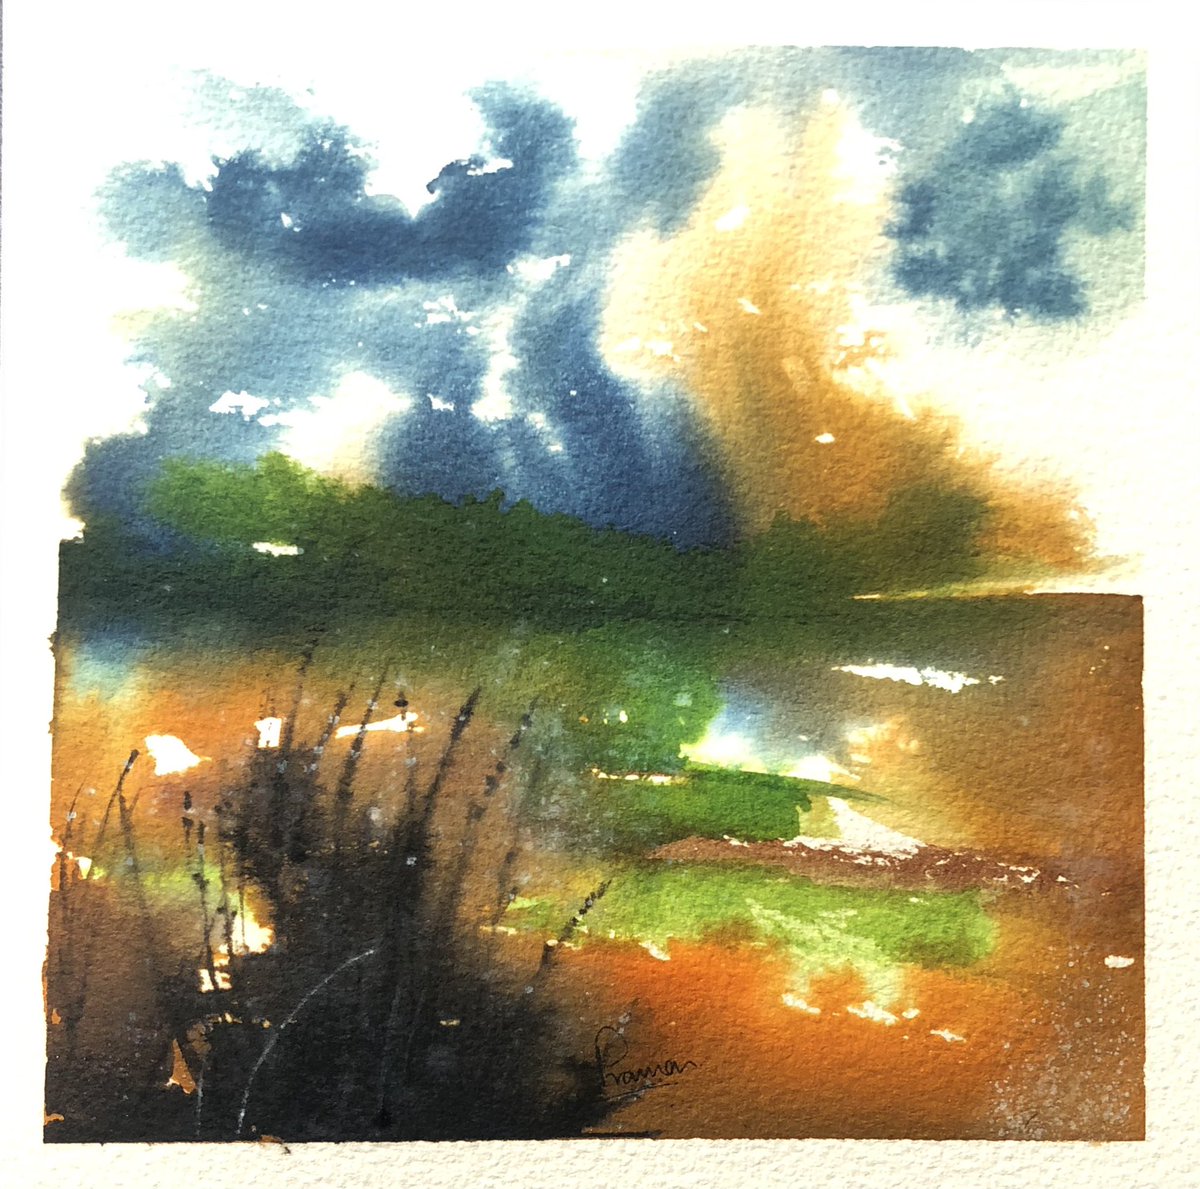 Another @GemKalmthout Heide oriented abstract sunshine #watercolour painting. On Arches cold press paper with concentrated watercolour paint. Available fore collection. Please amplify if you like.
#artcommunity
#ArtLovers #art #artist #artwork #naturetwitter #arttwitter